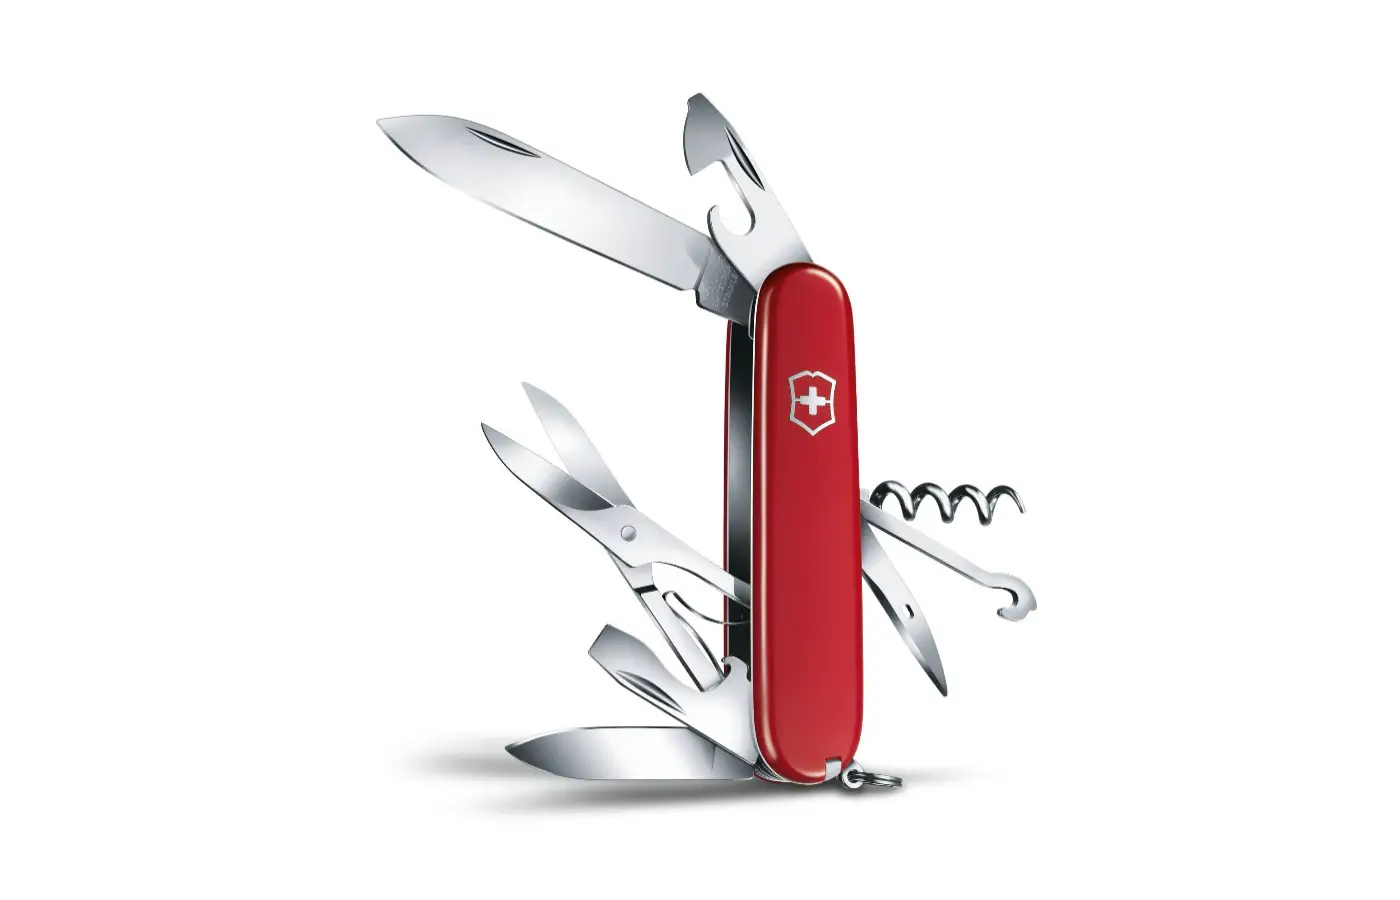 This multi-tool has 14 functions, including the keyring, but its set up requires two hands to opporate.